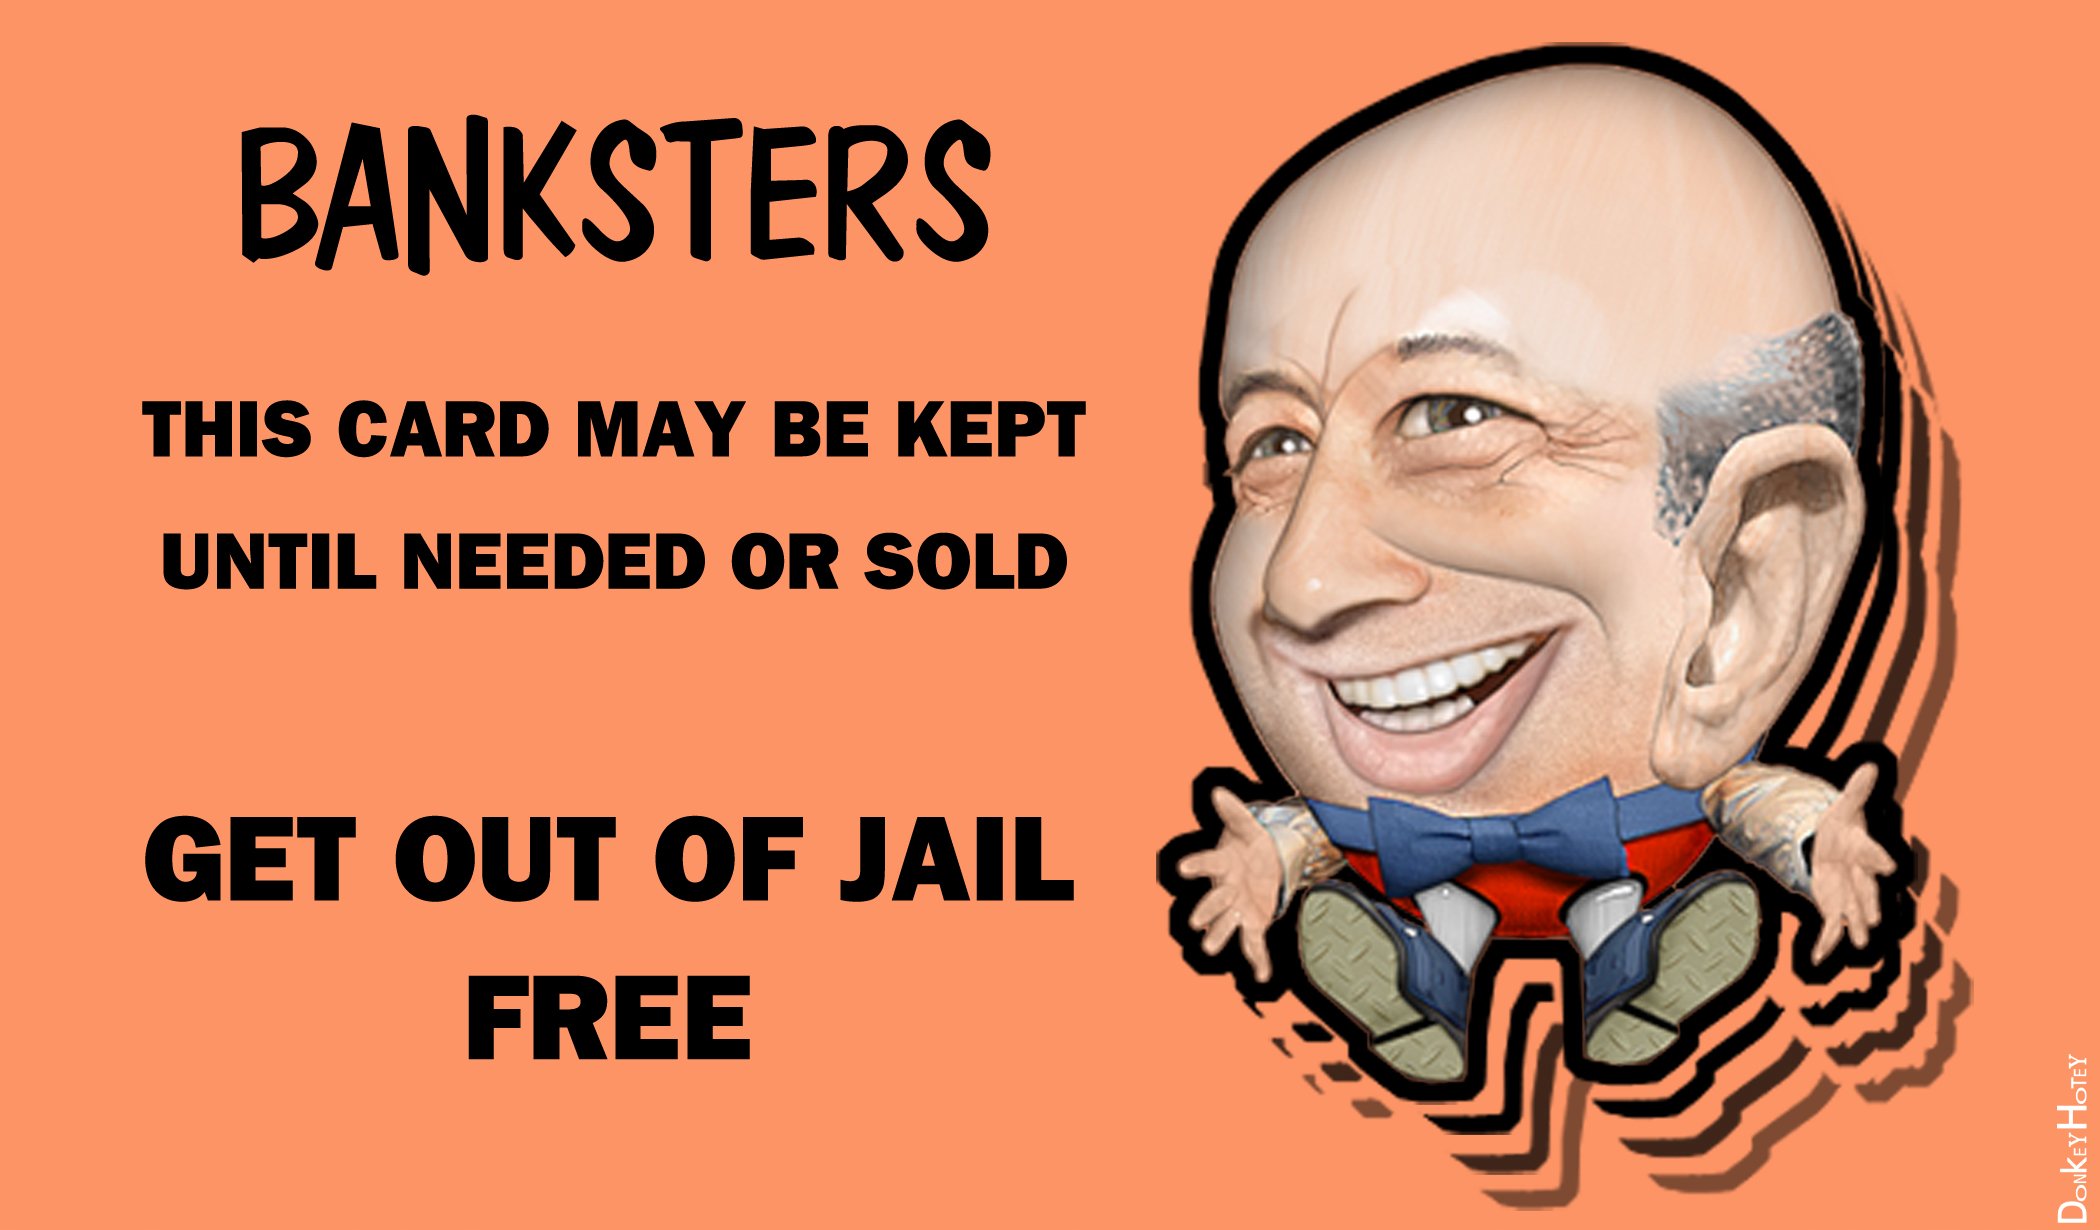 Banks_Get_Out_of_Jail_Free_Card_Blankfein_2100x1230.jpg